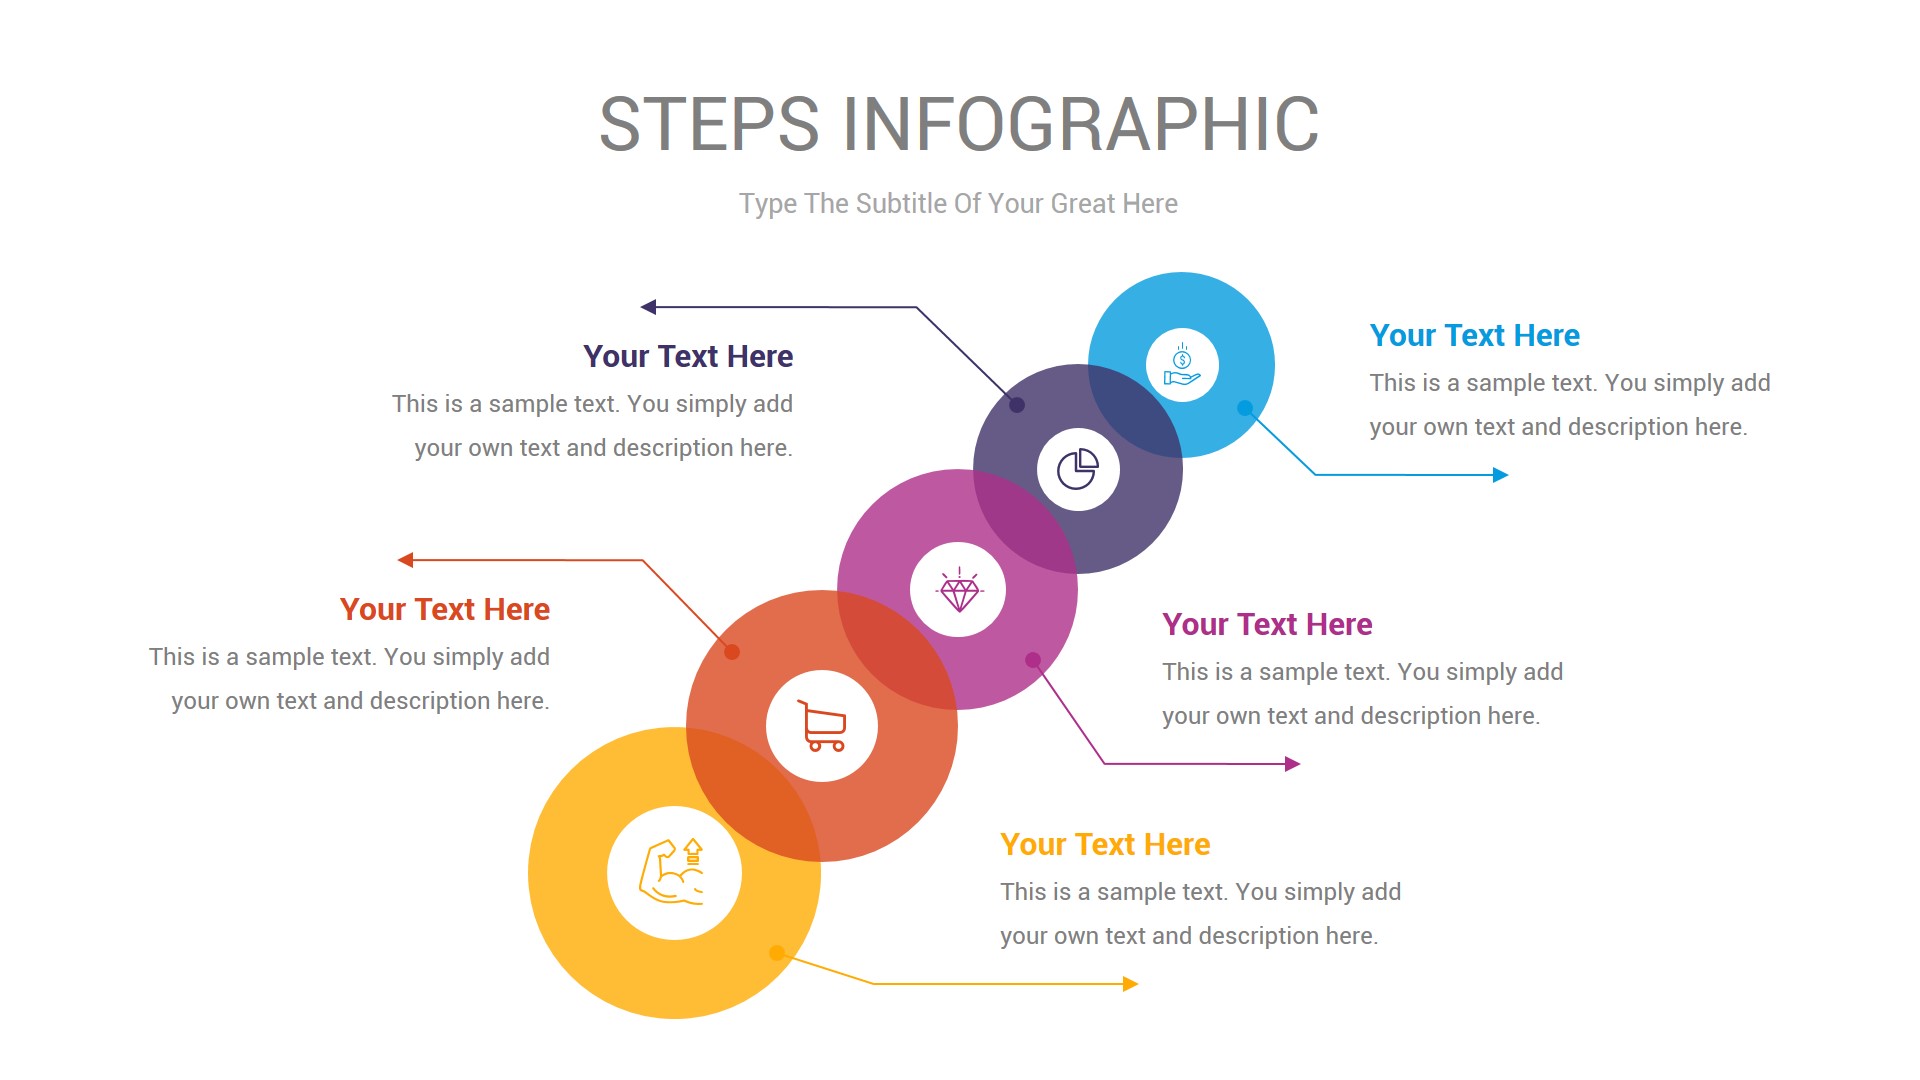 Steps Infographic PowerPoint Template by Neroox | GraphicRiver